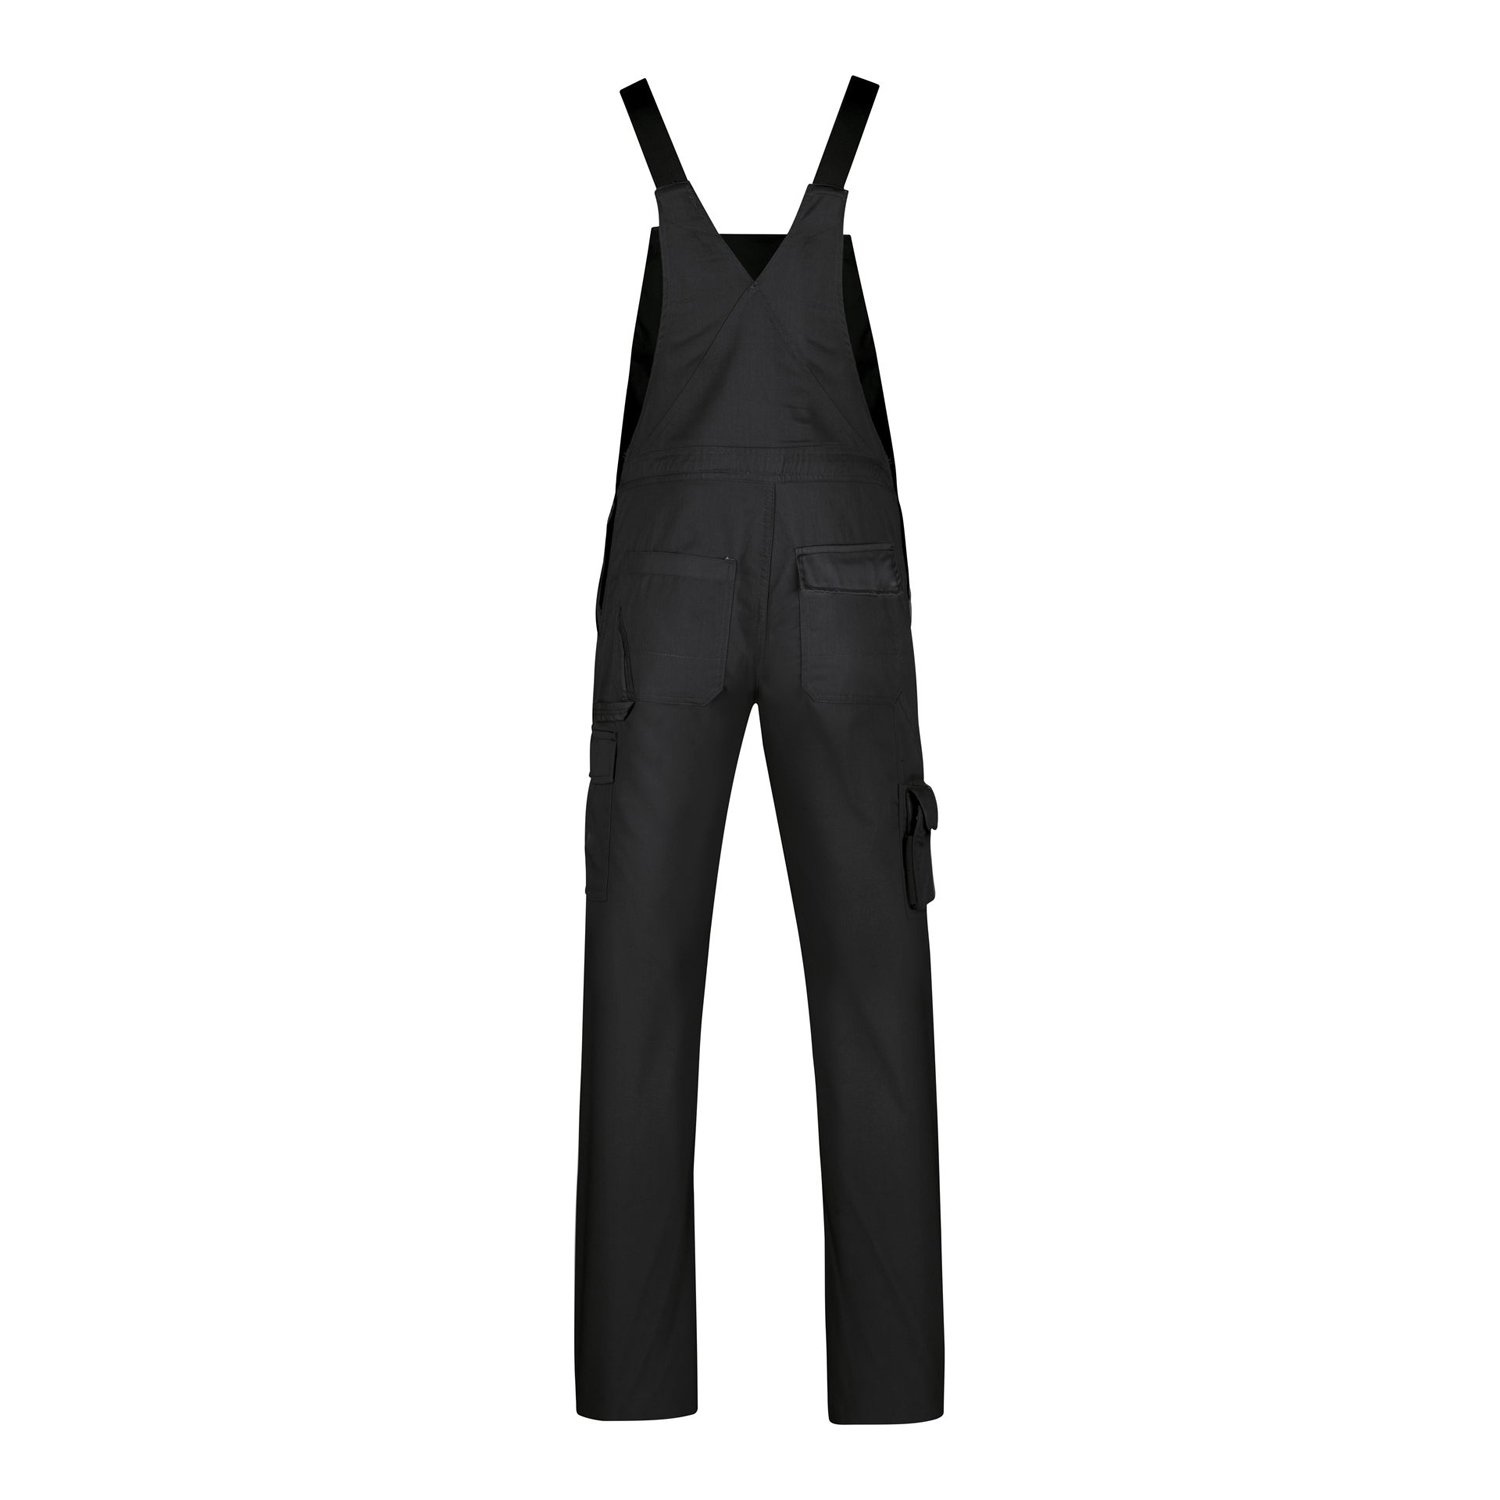 Workingclothes, Pants by PKA Klöcker in black, large sizes up to 74